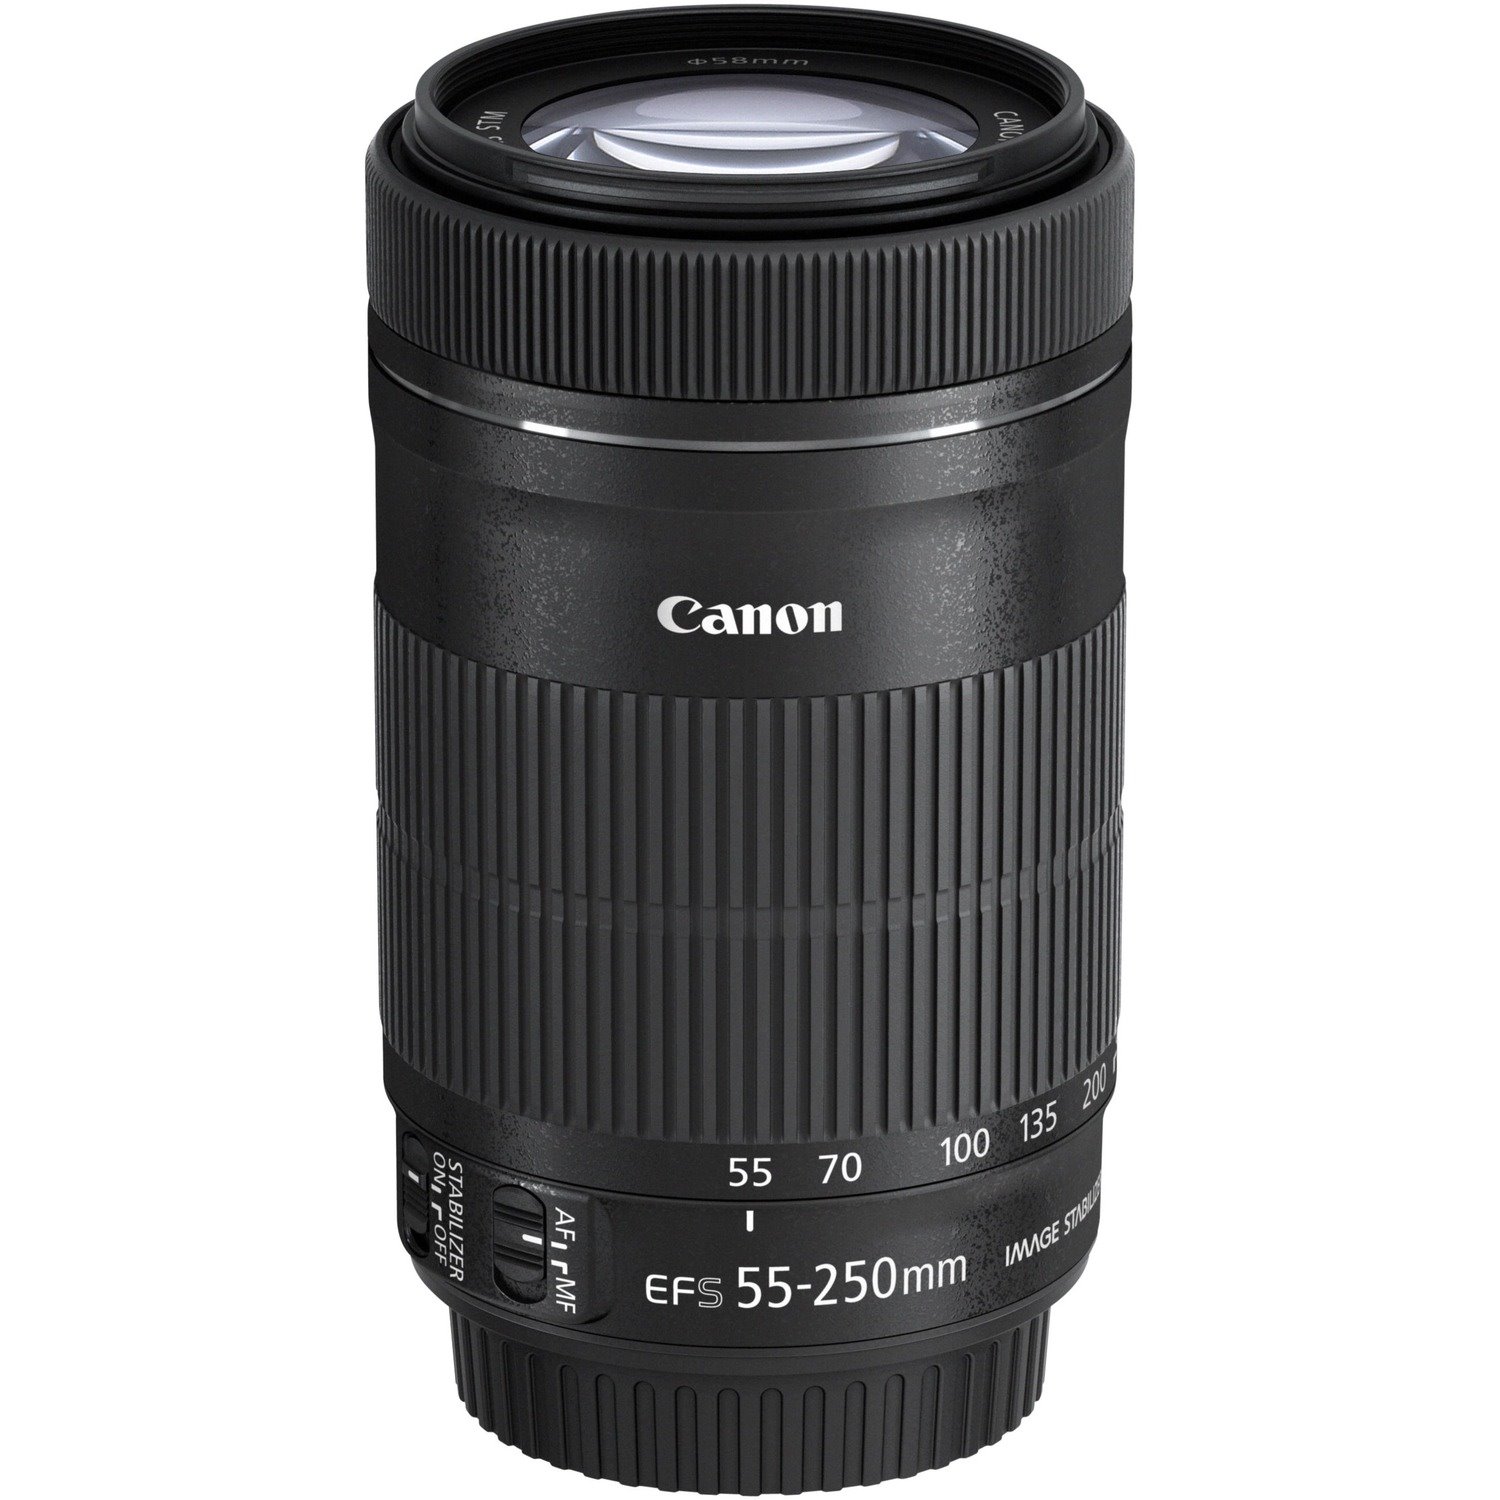 Canon - 55 mm to 250 mm - f/5.6 - Zoom Lens for Canon EF-S